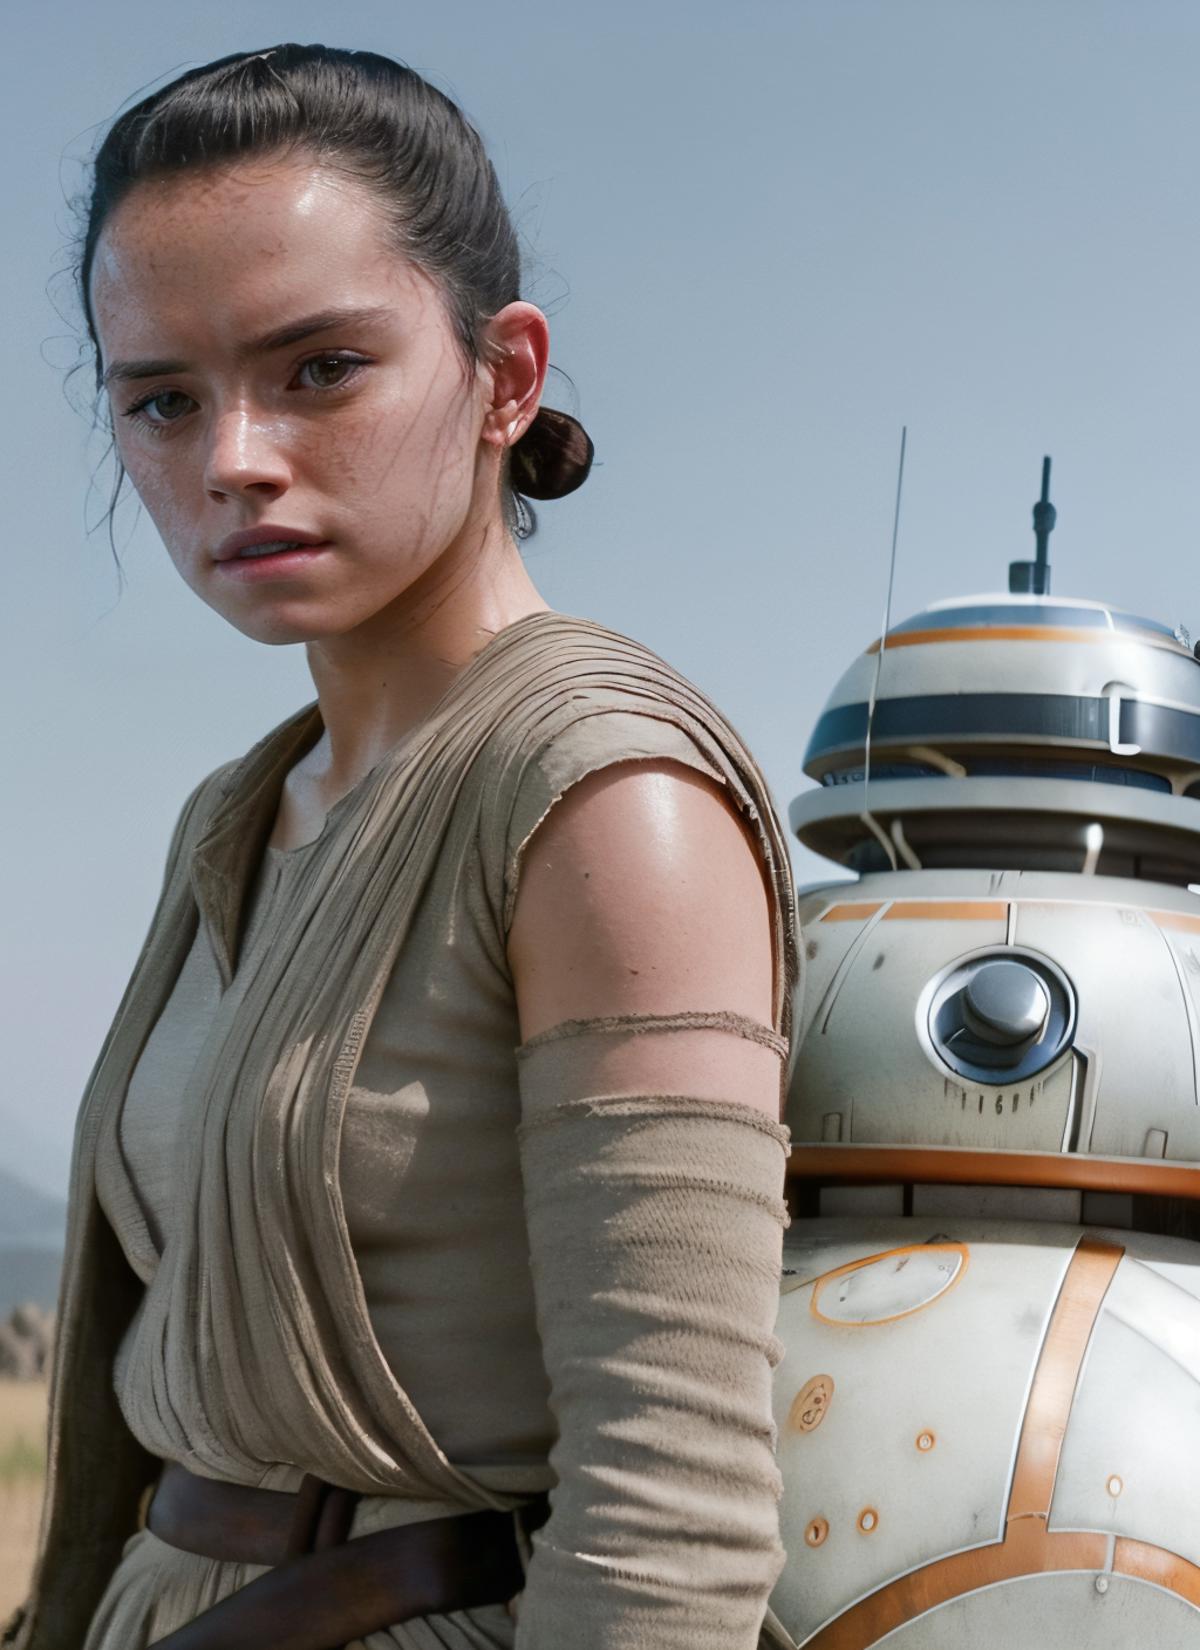 Rey from Star Wars (Daisy Ridley) image by astragartist